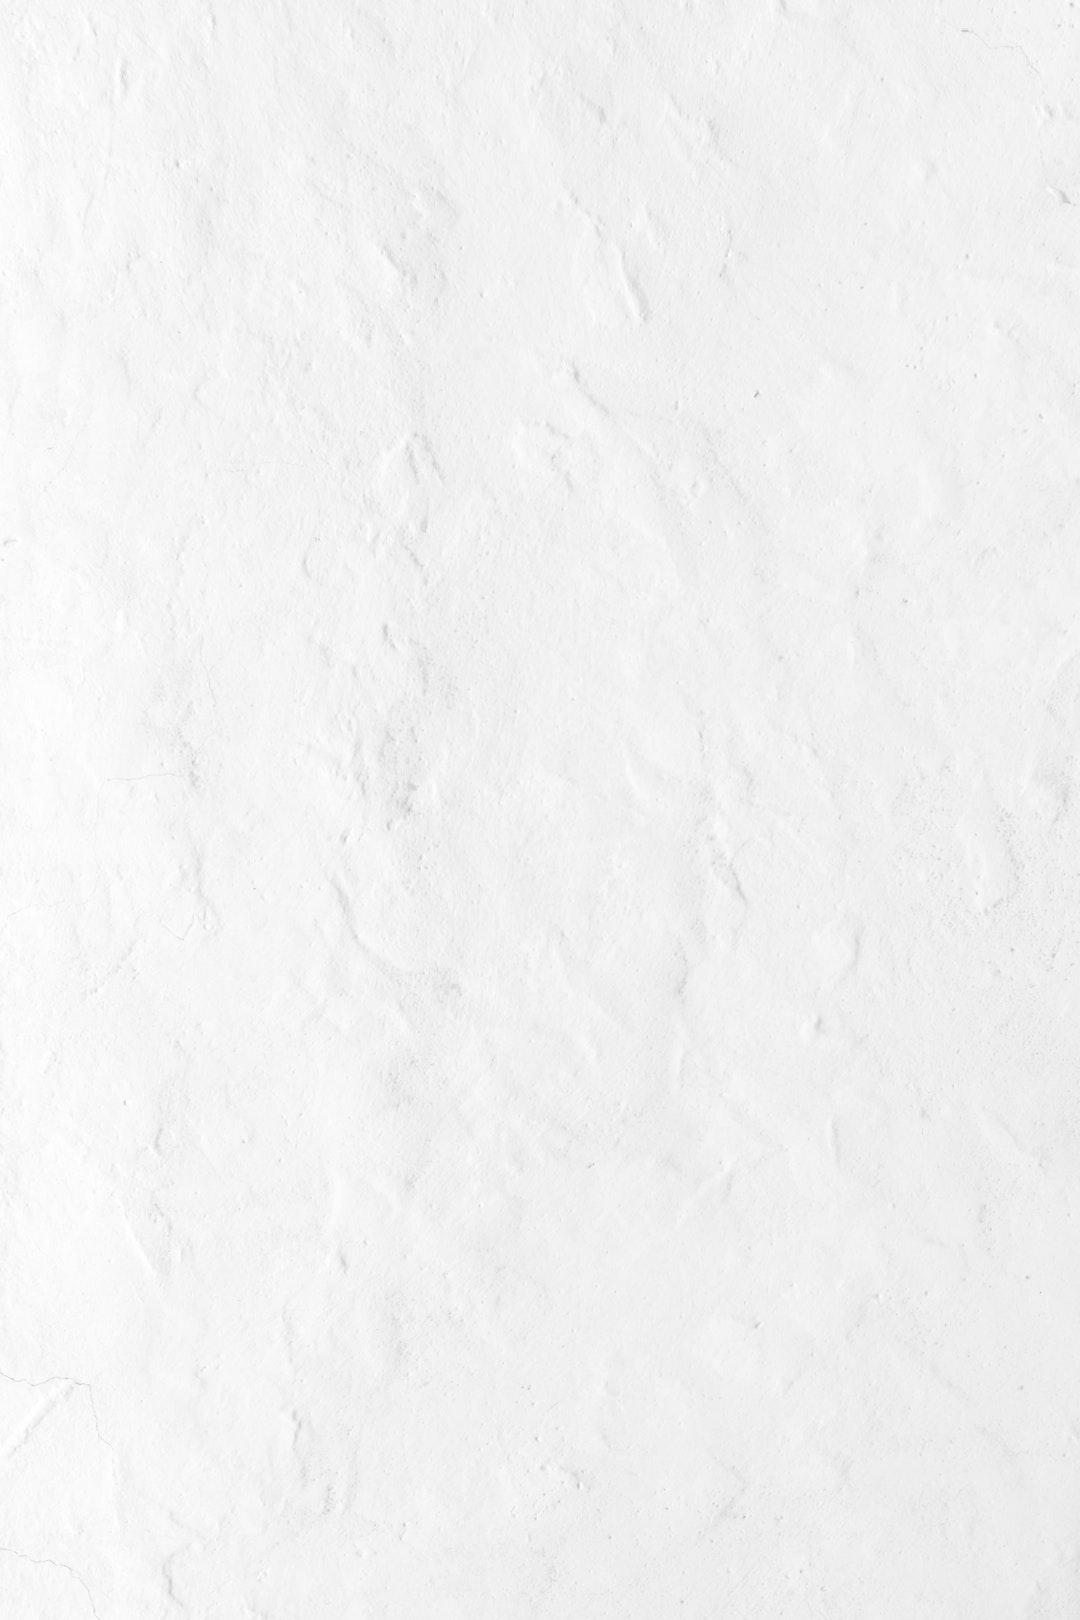 White Picture [HD]. Download Free Image